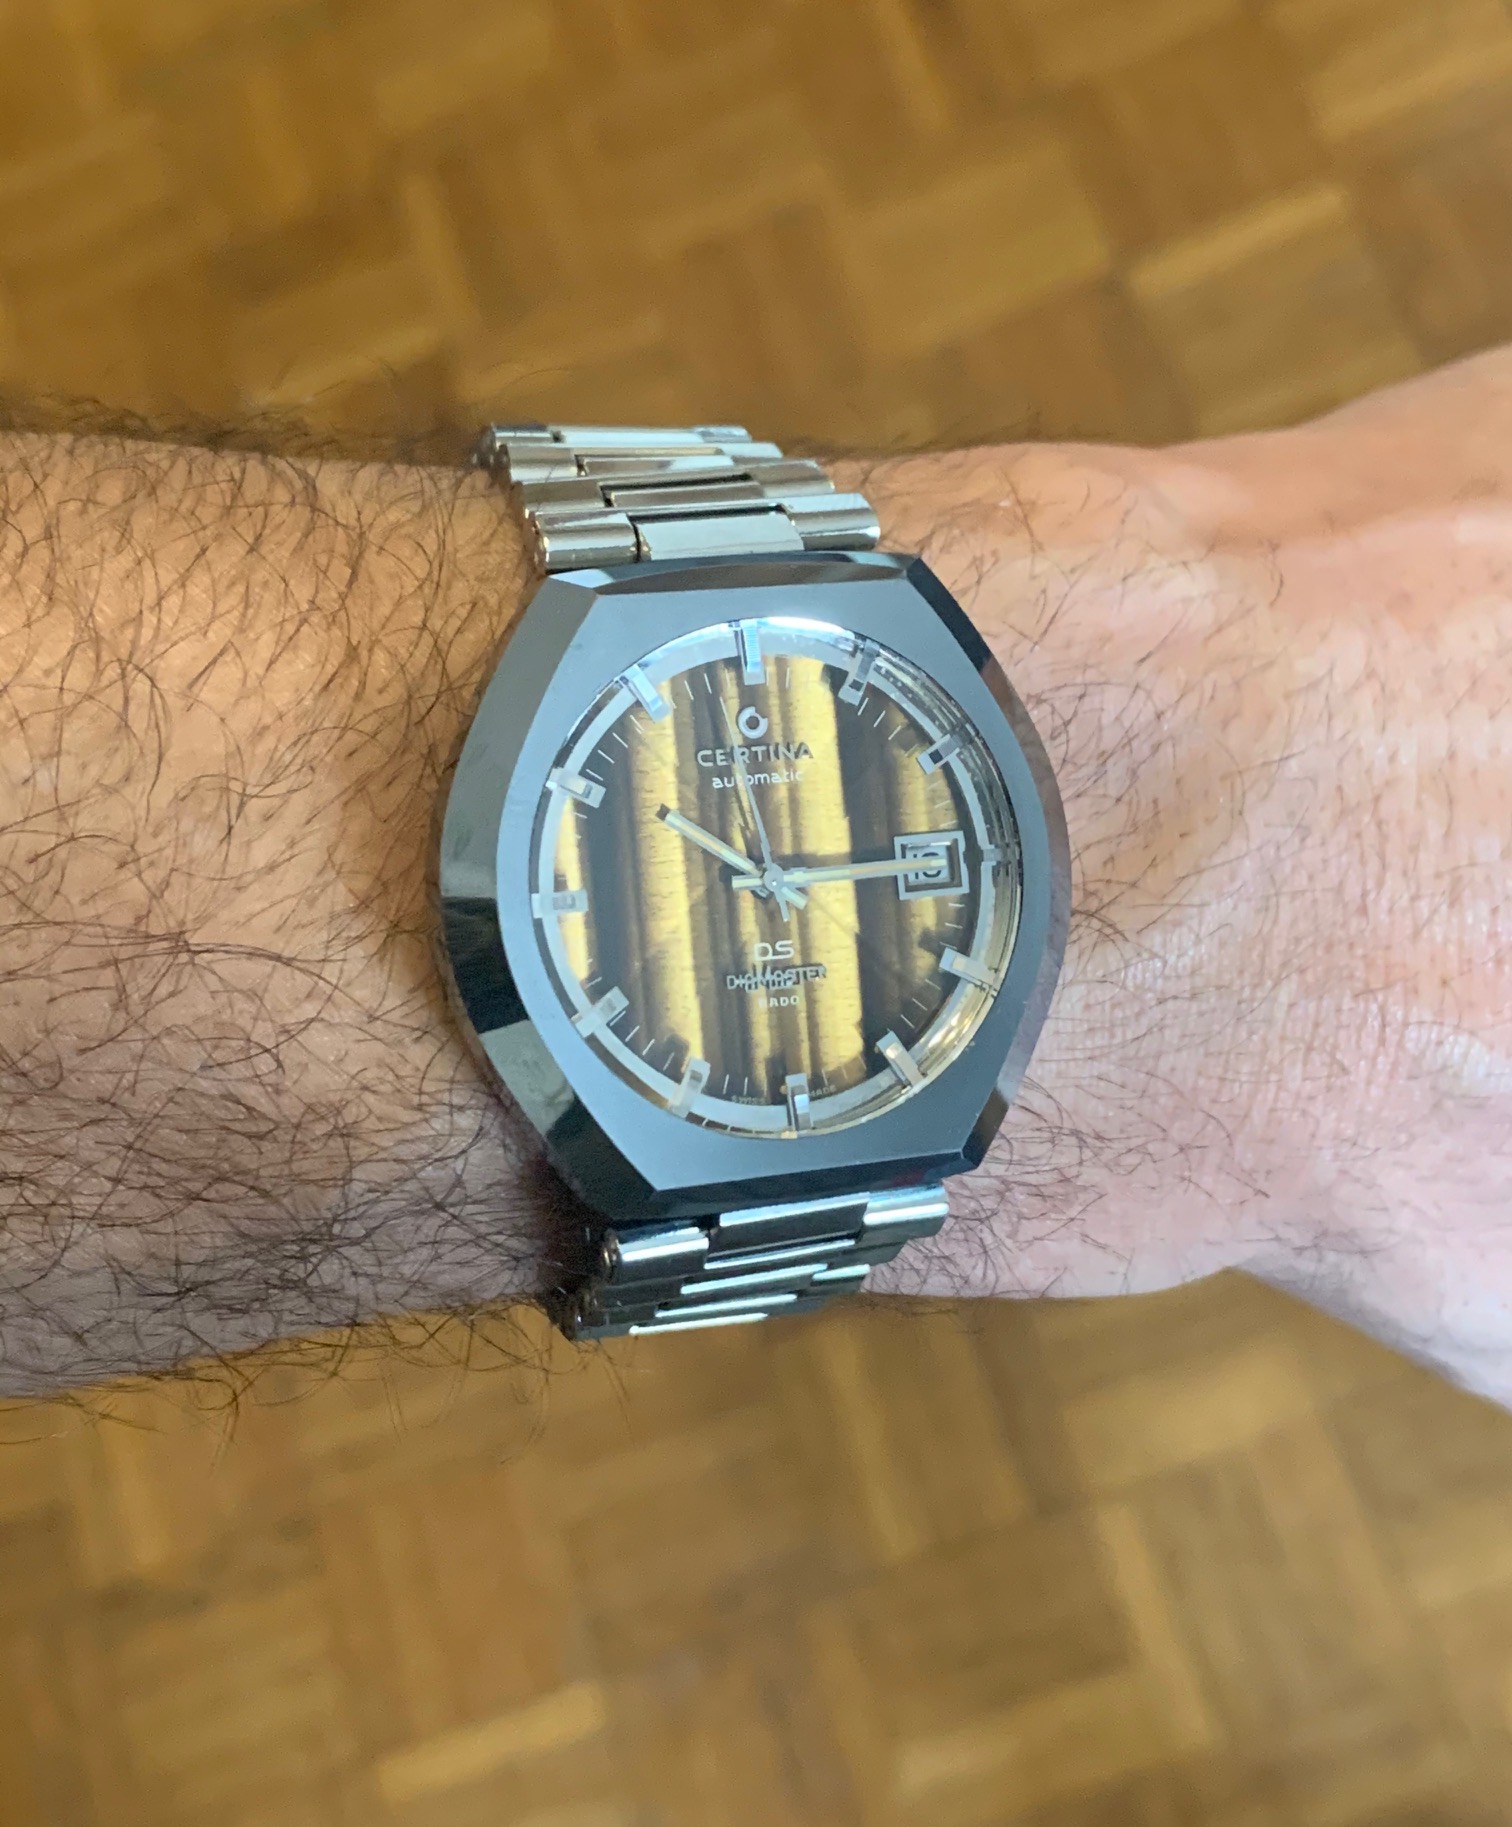 Owner Review: Certina DS Diamaster Rado – “The Eye of the Tiger”